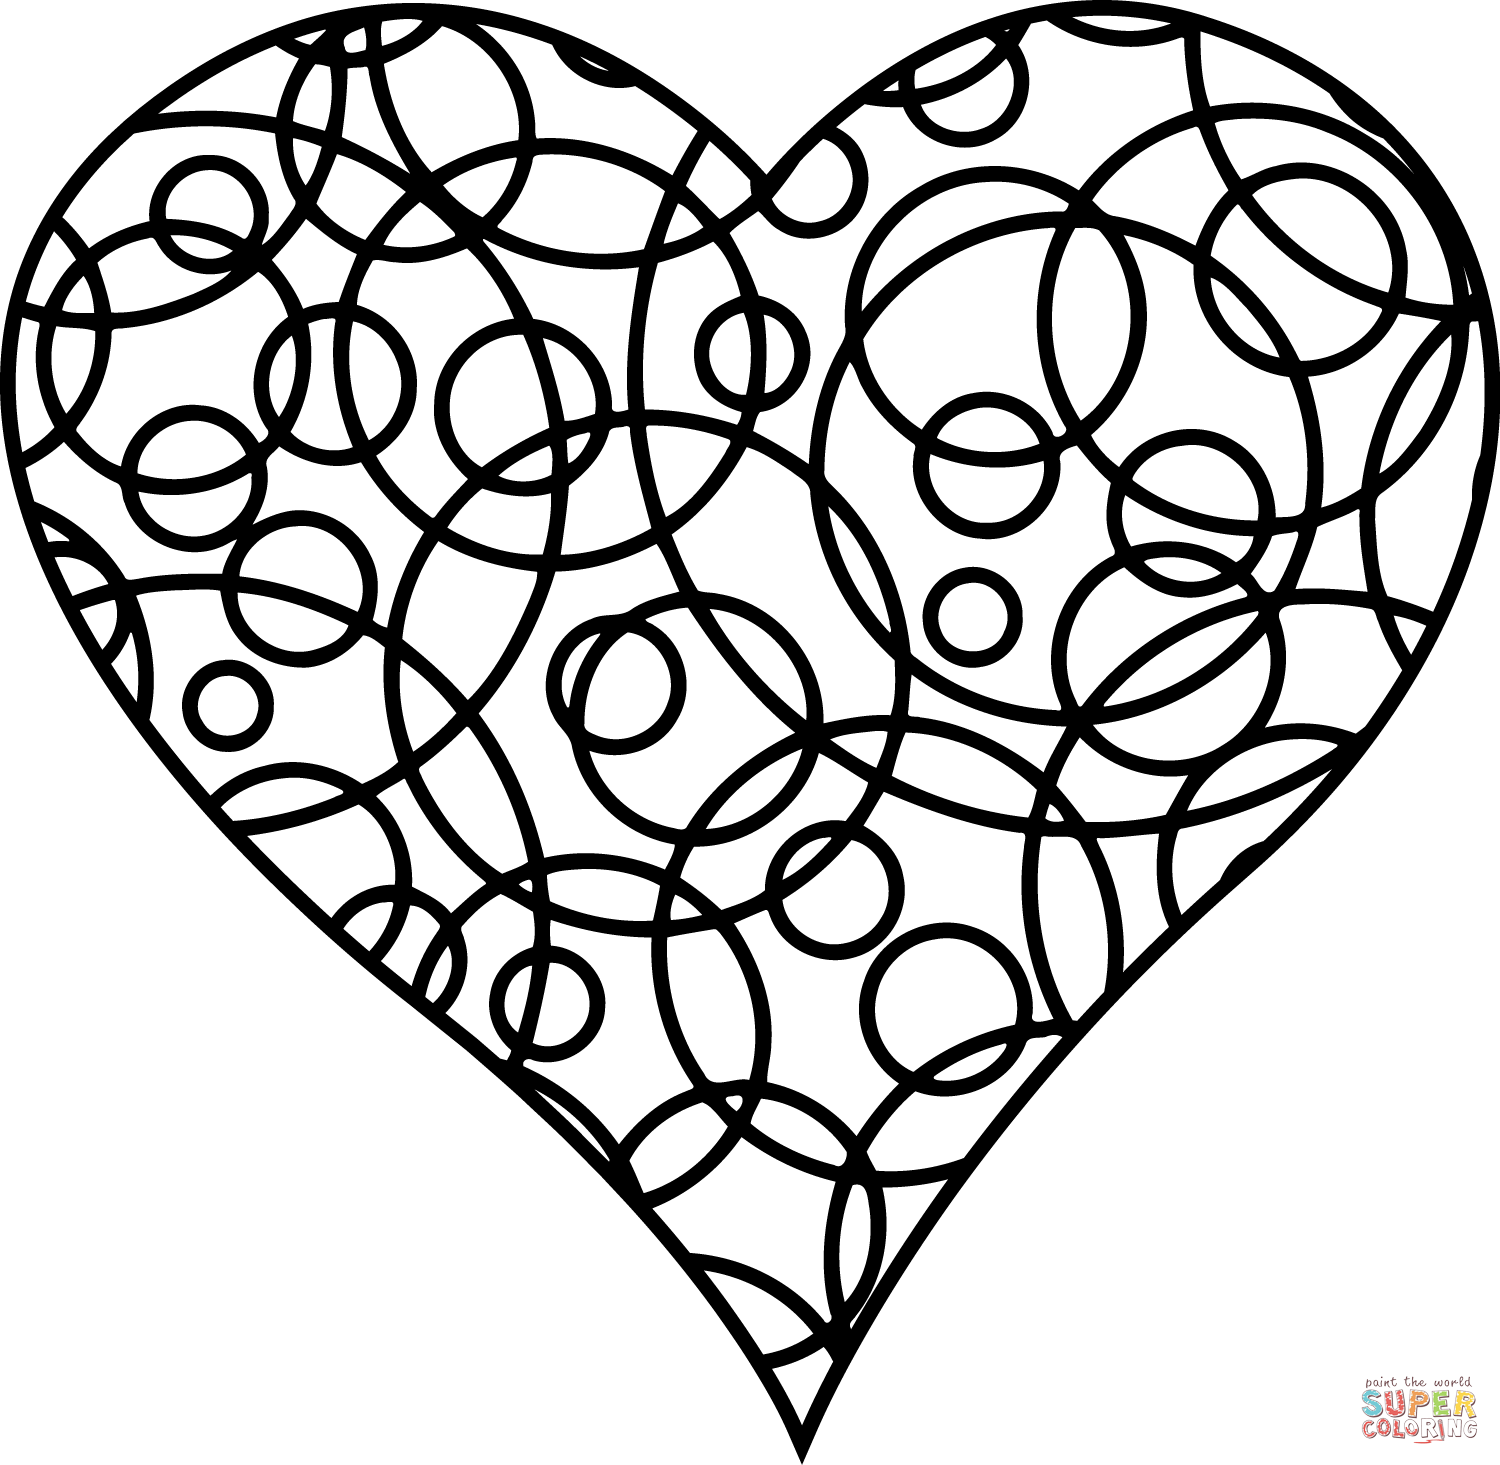 Patterned Heart coloring page | Free Printable Coloring Pages